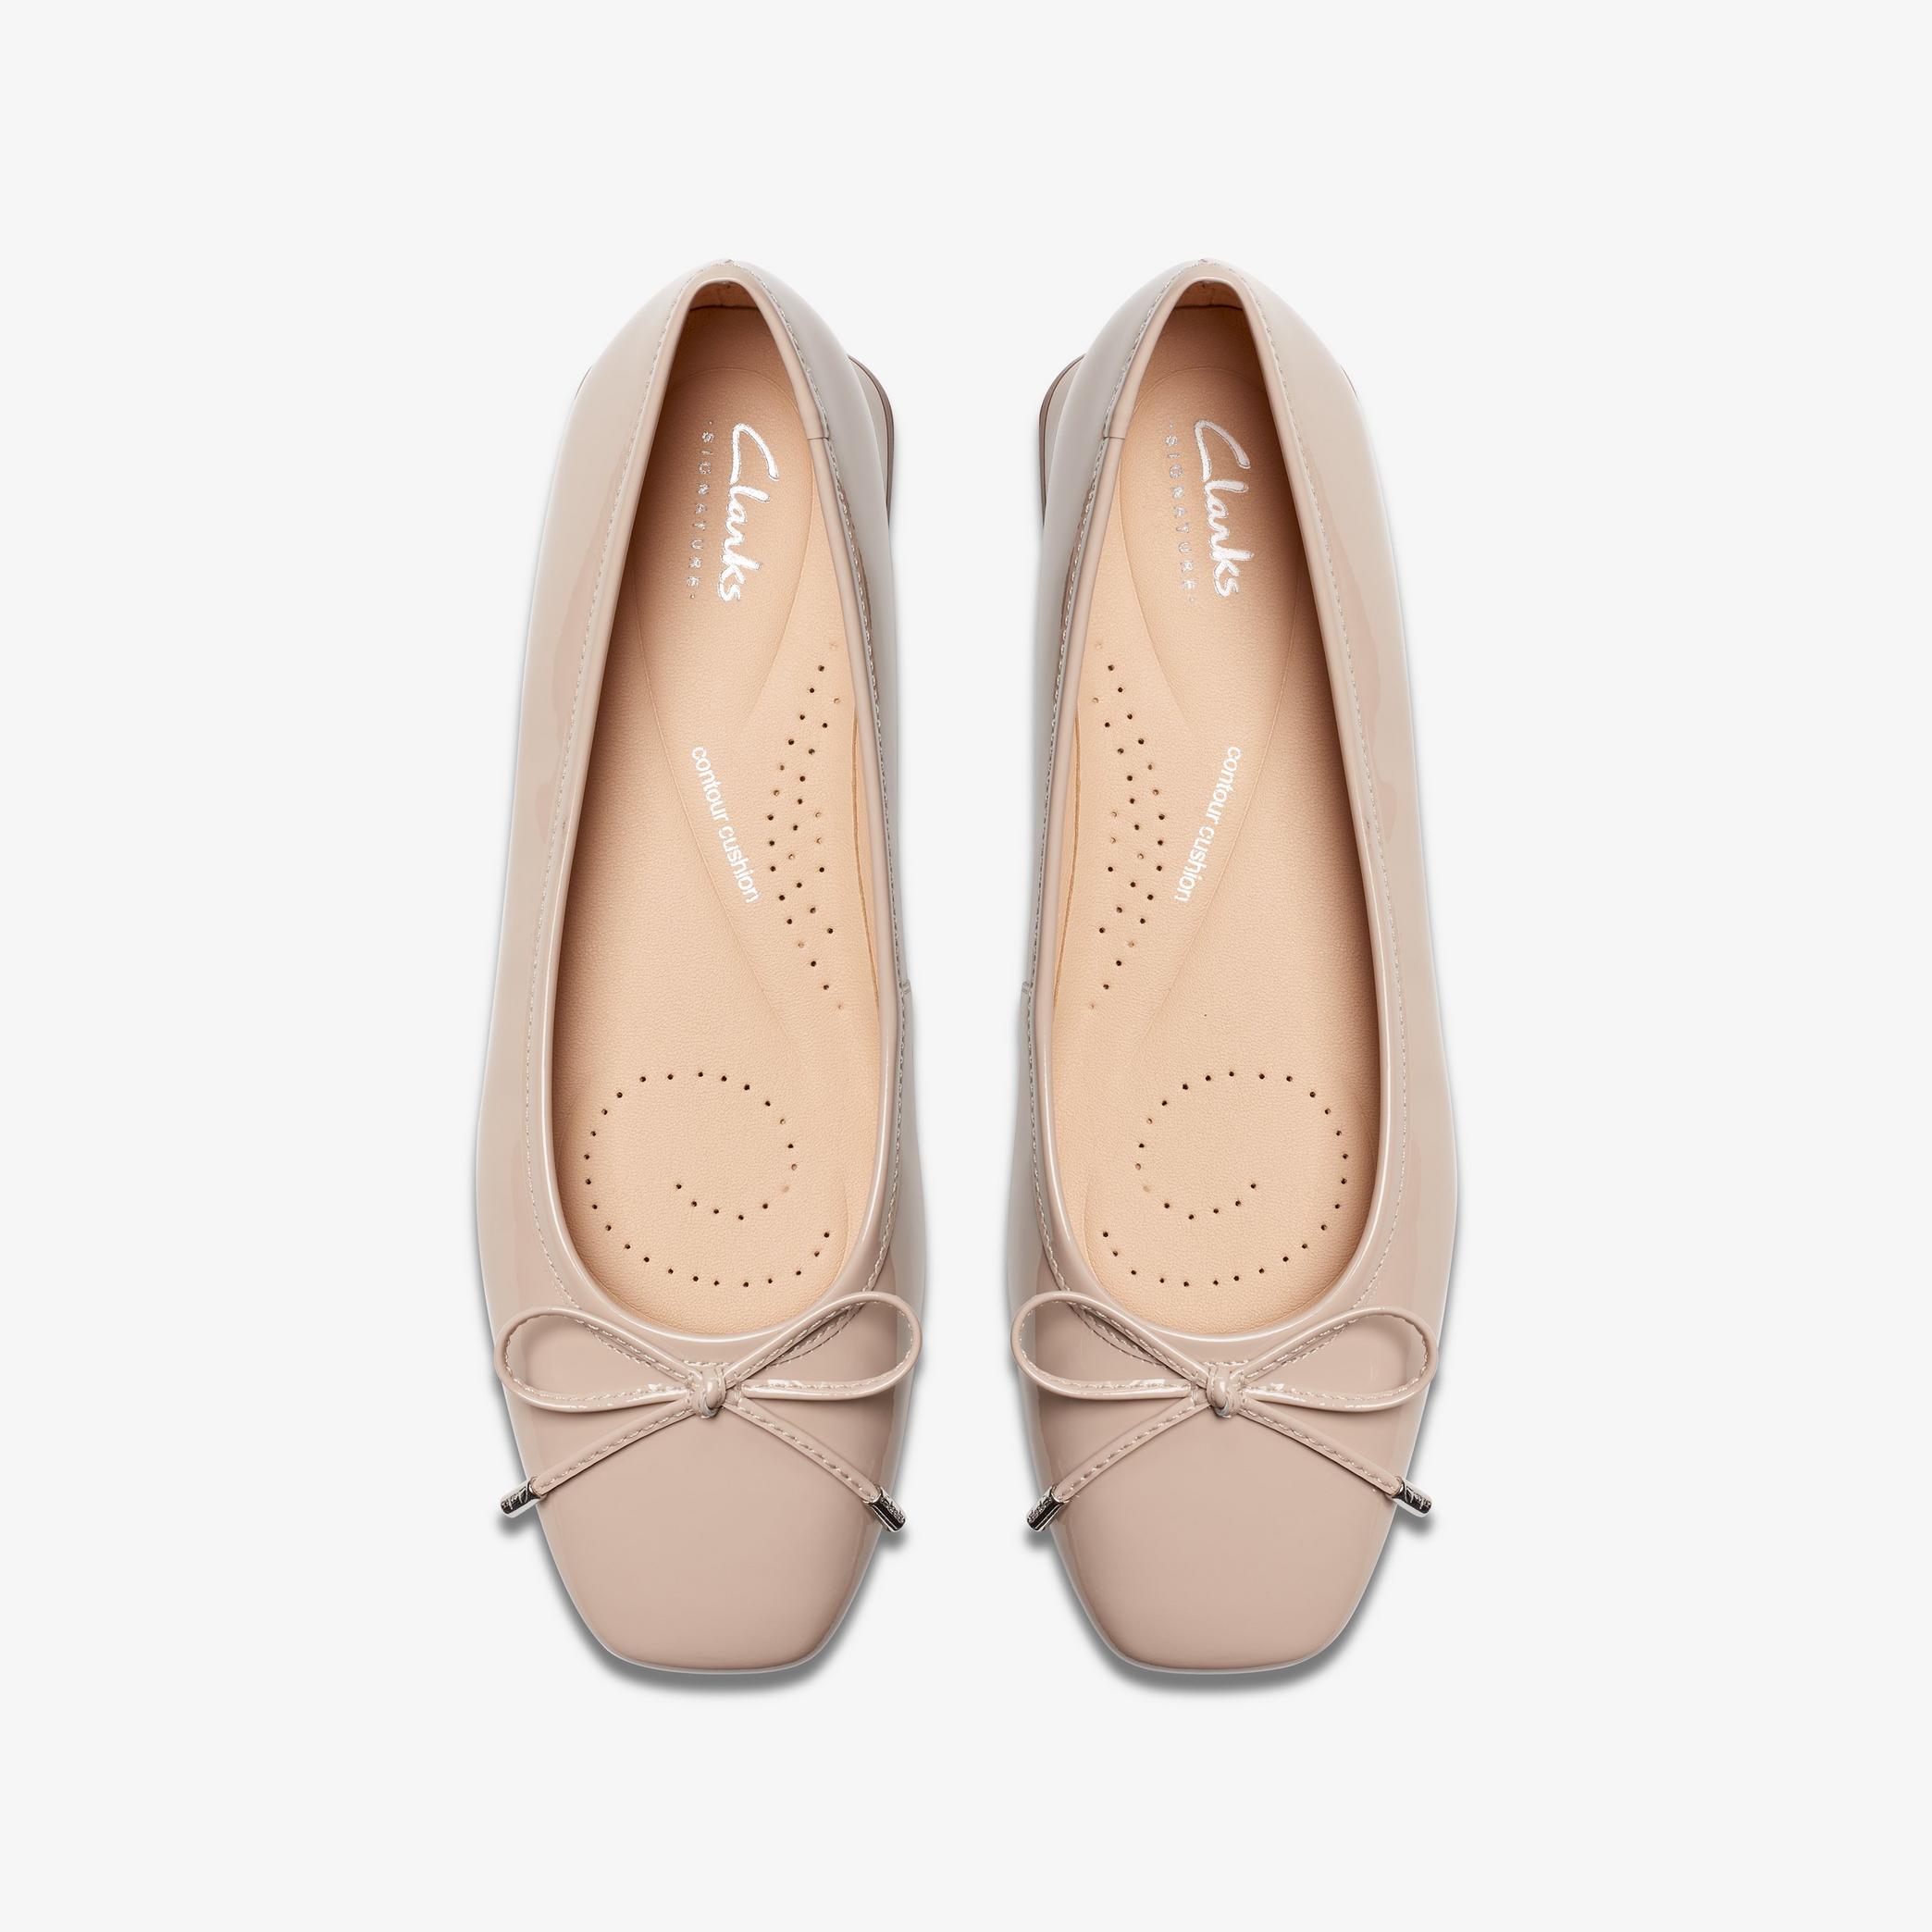 Ubree 15 Step Sand Patent Ballerina Shoes, view 10 of 11